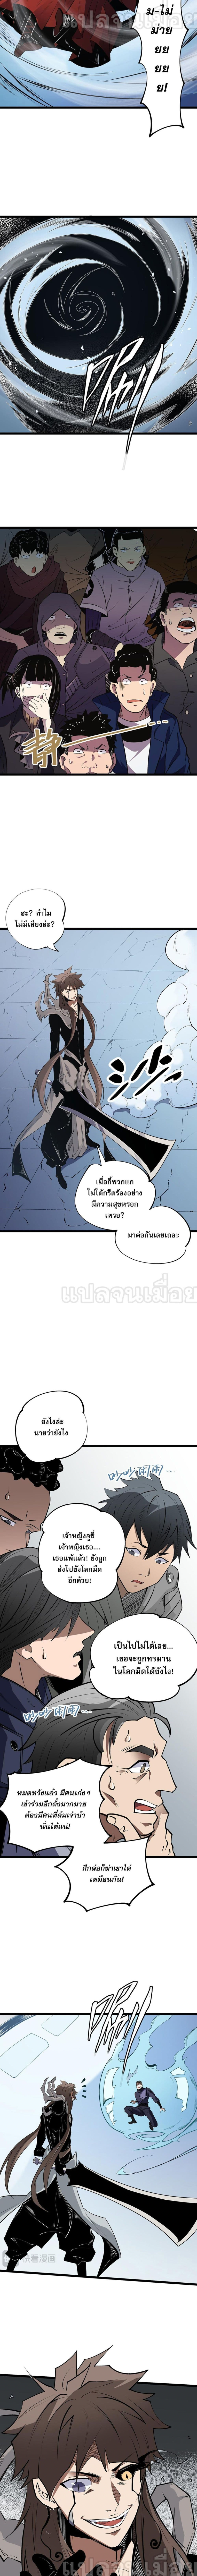 Job Changing for the Entire Population: The Jobless Me Will Terminate the Gods ฉันคือผู้เล่นไร้อาชีพที่สังหารเหล่าเทพ 74-74